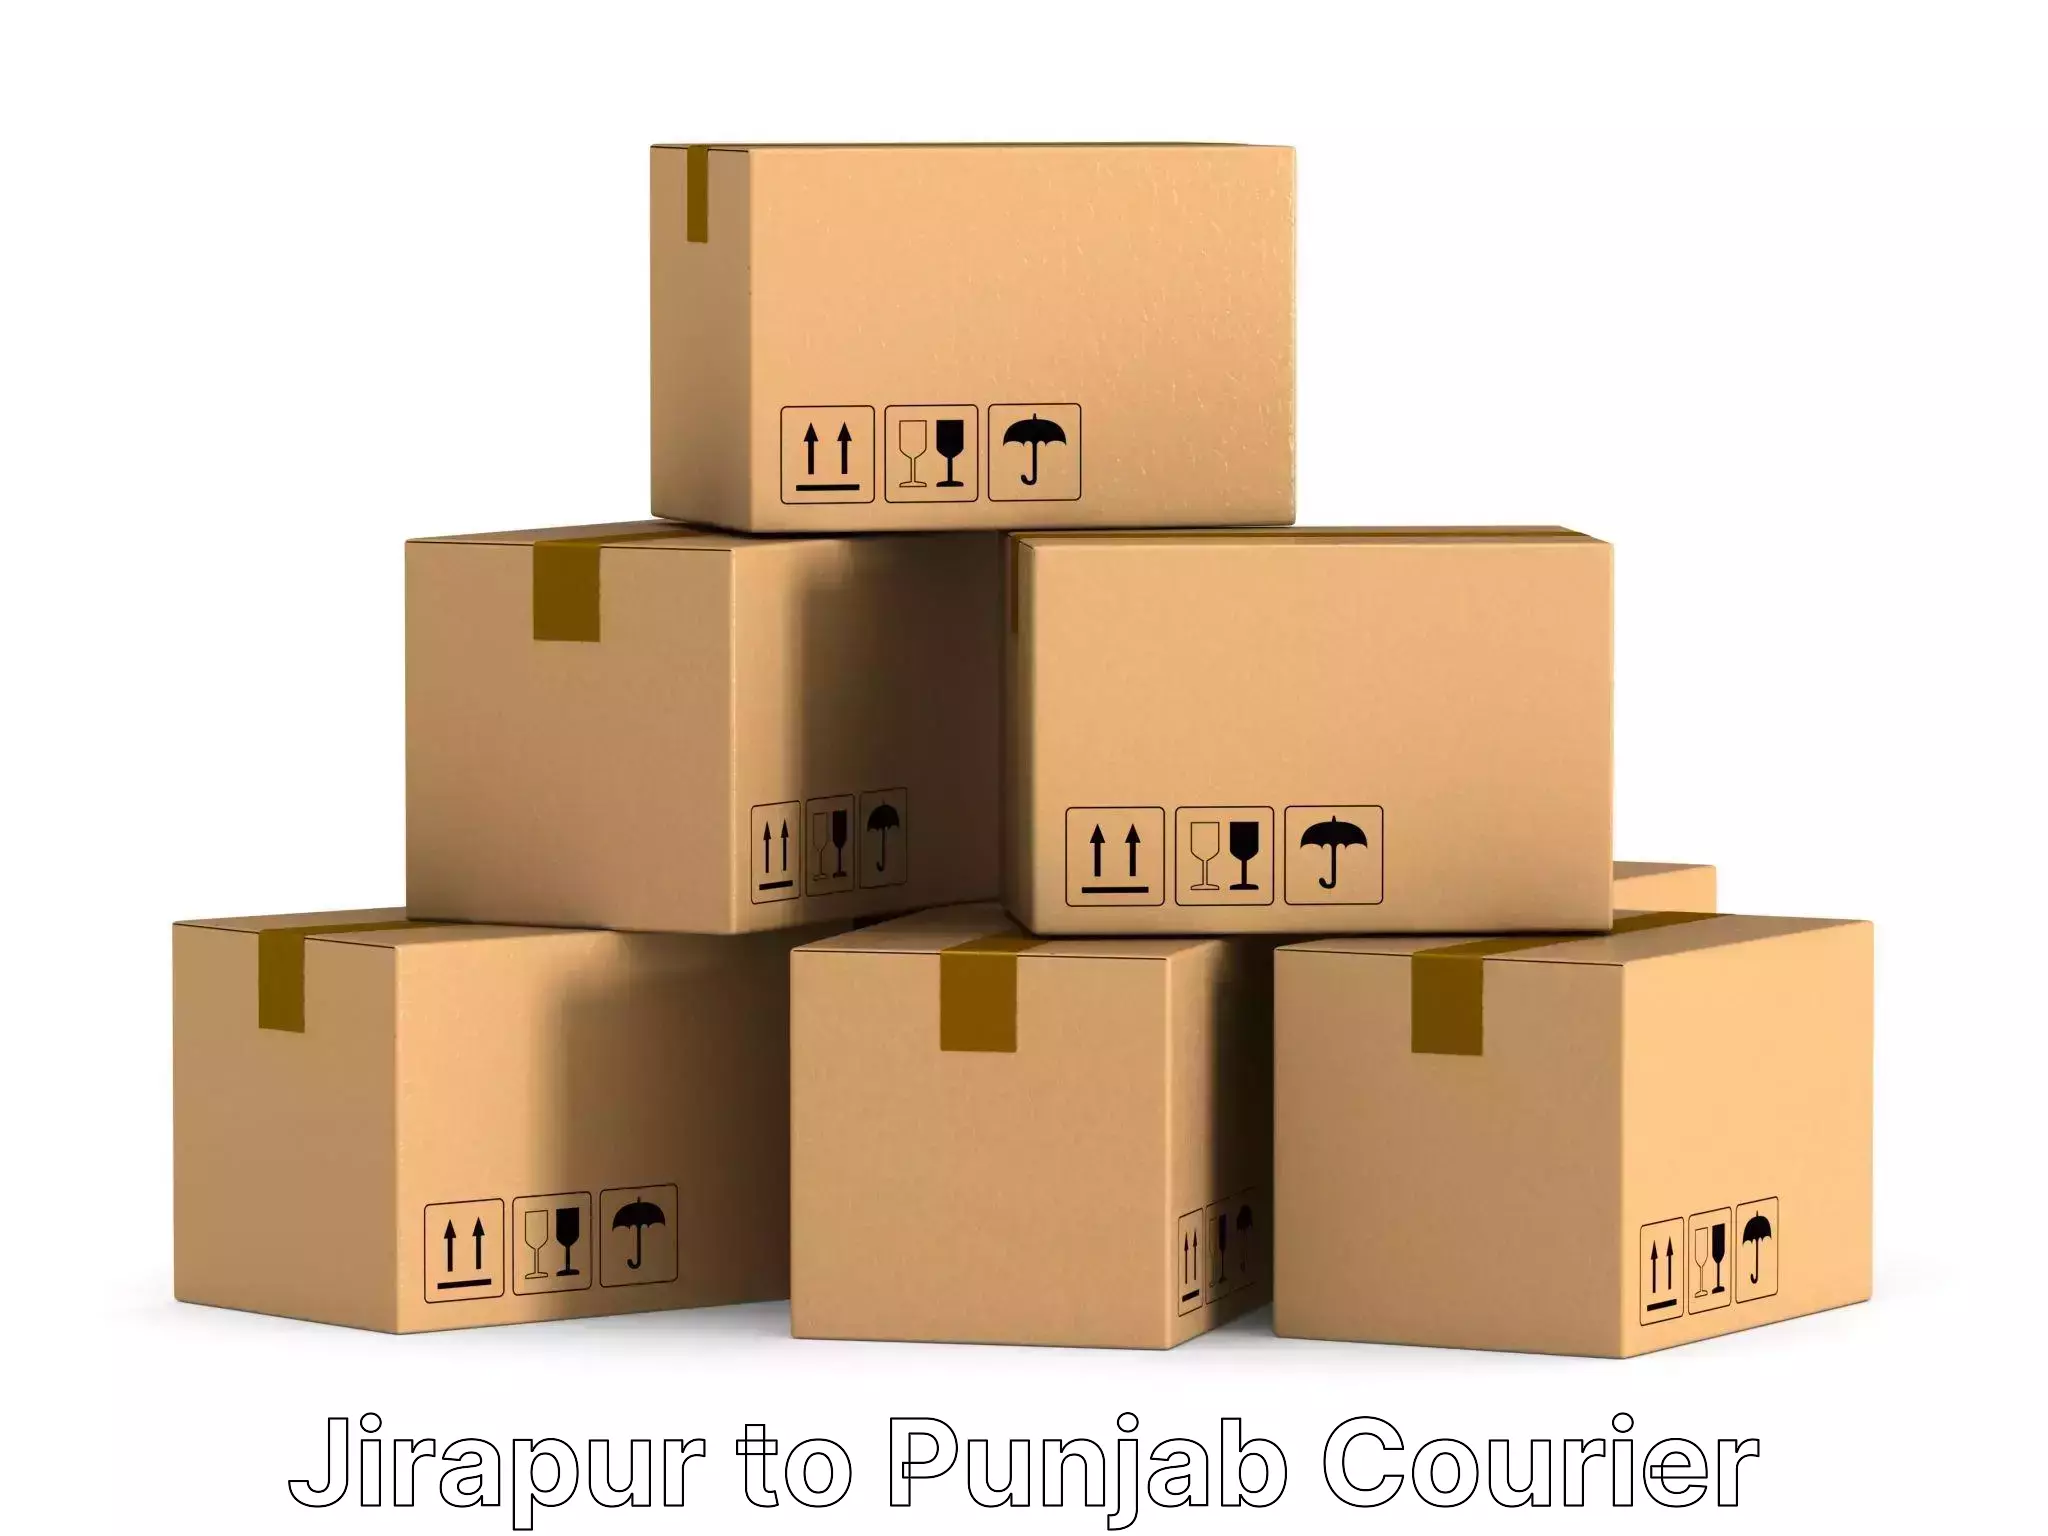 Moving and packing experts Jirapur to Jhunir